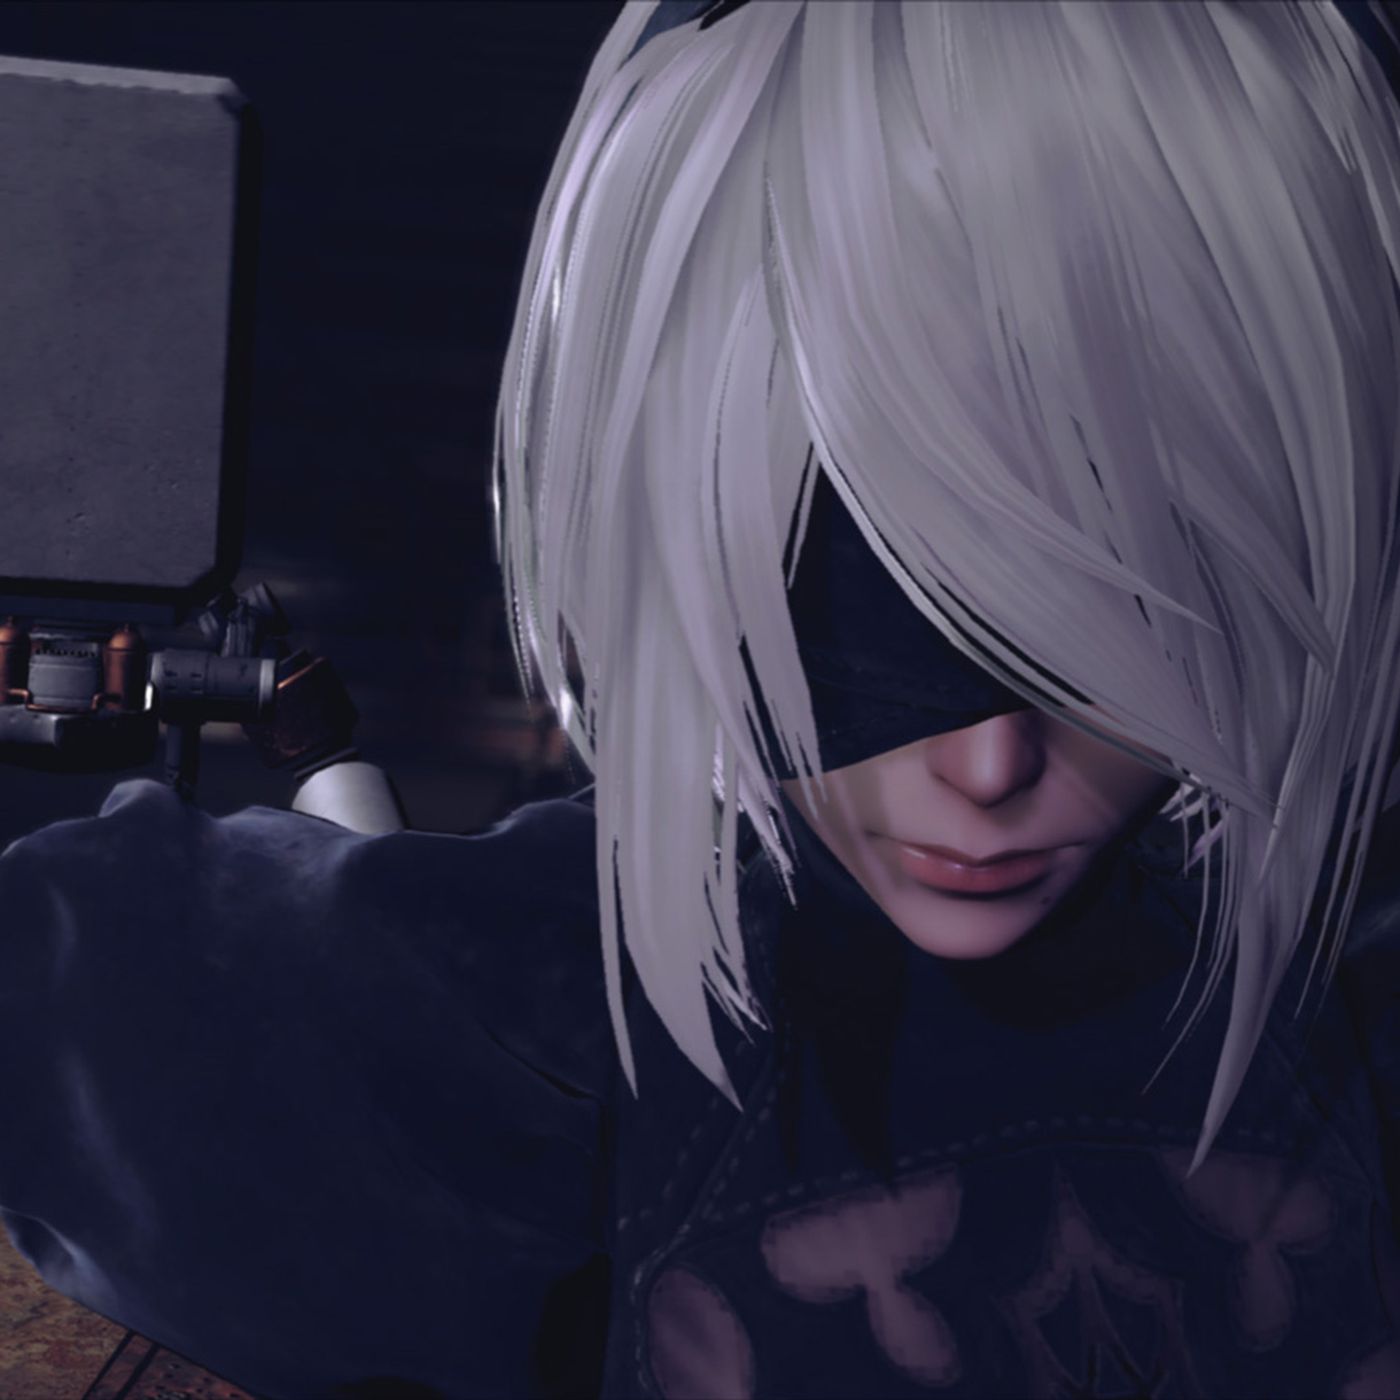 Betasten Scherm stout Xbox Game Pass gets better PC ports of Nier: Automata, The Evil Within -  Polygon